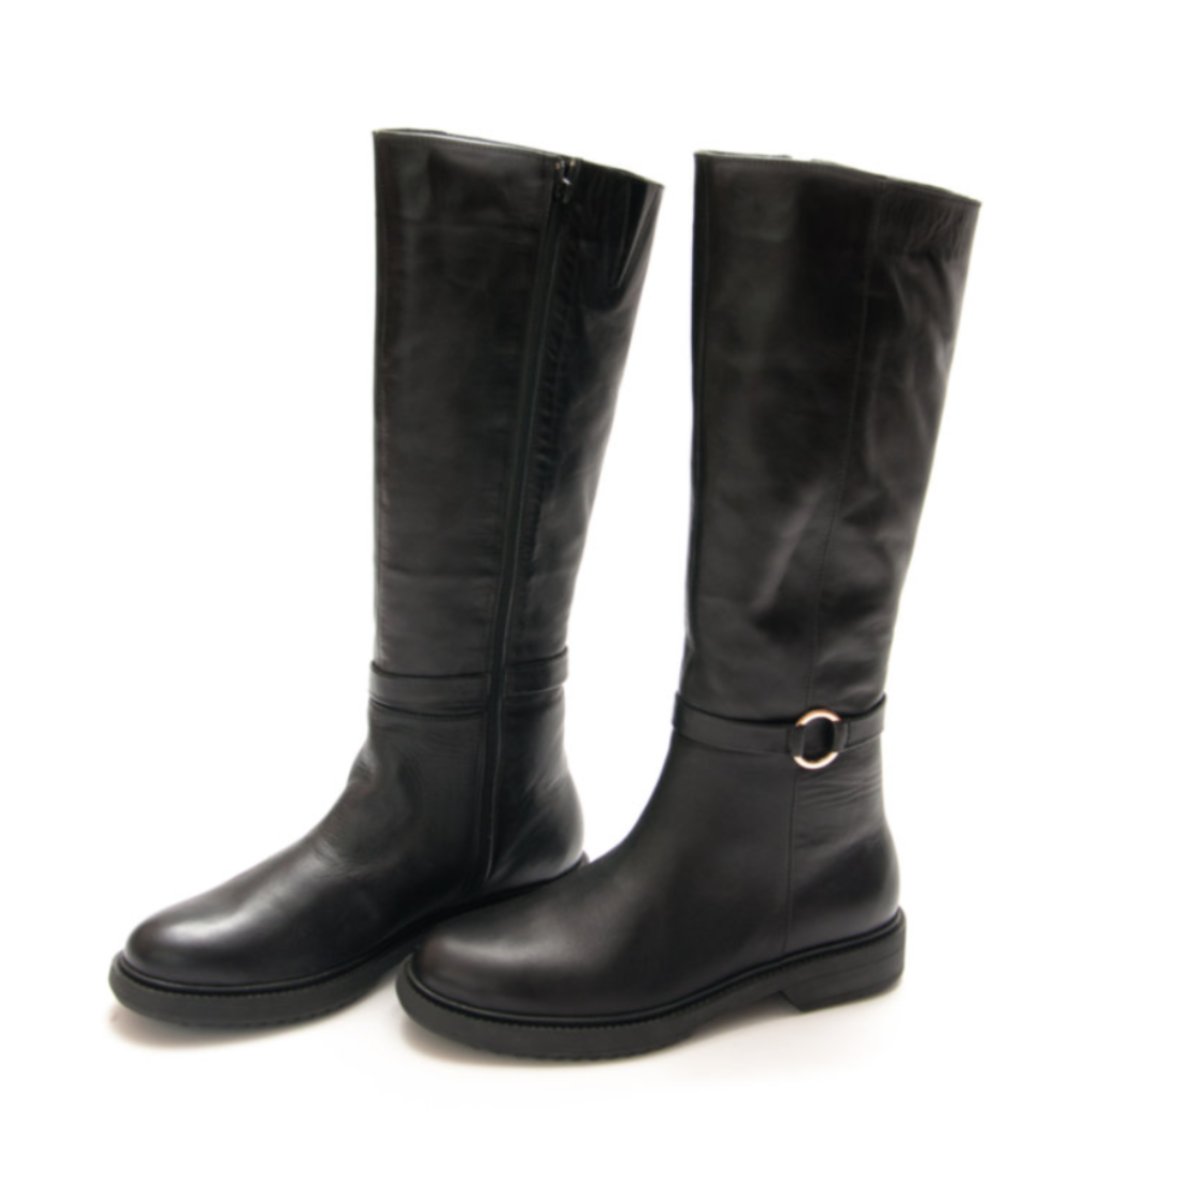 Women's black leather boots 4121 — ablu Сheсk